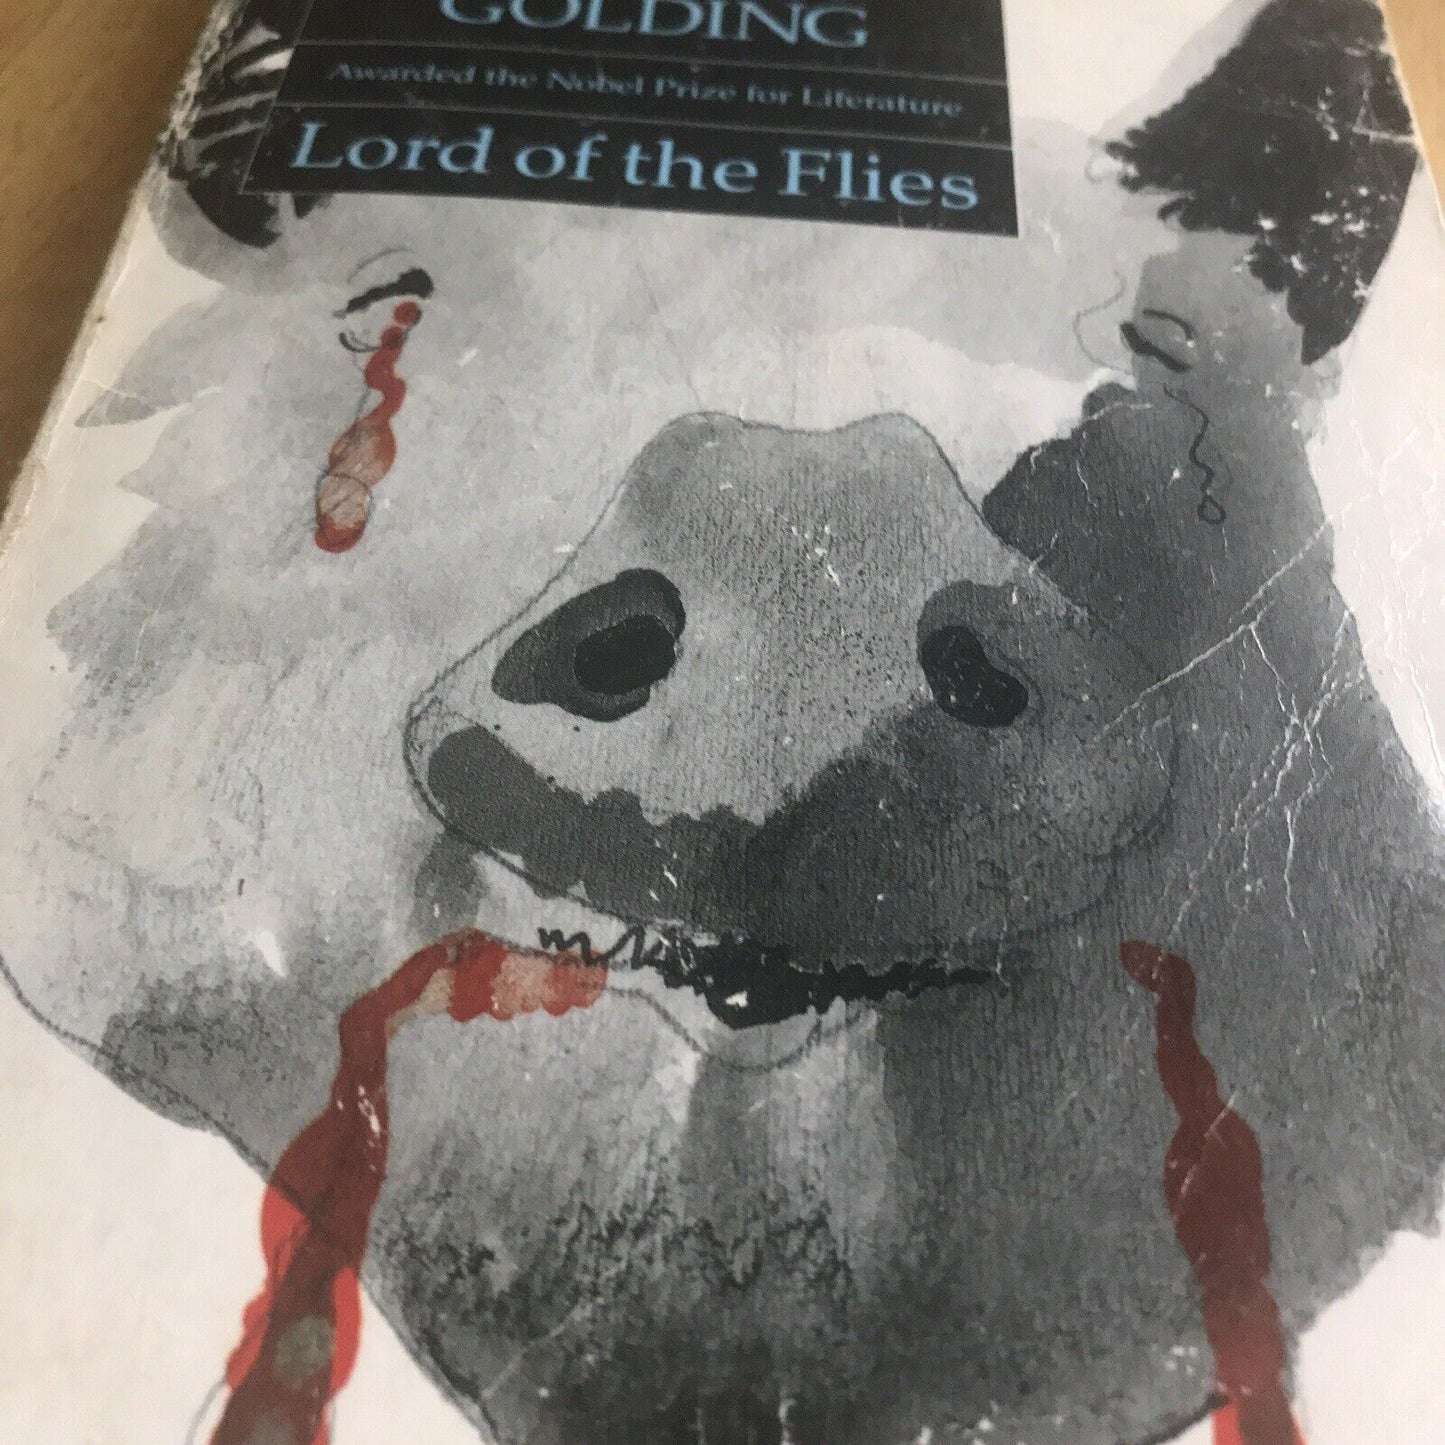 Lord of the Flies by William Golding (Paperback, 1973)